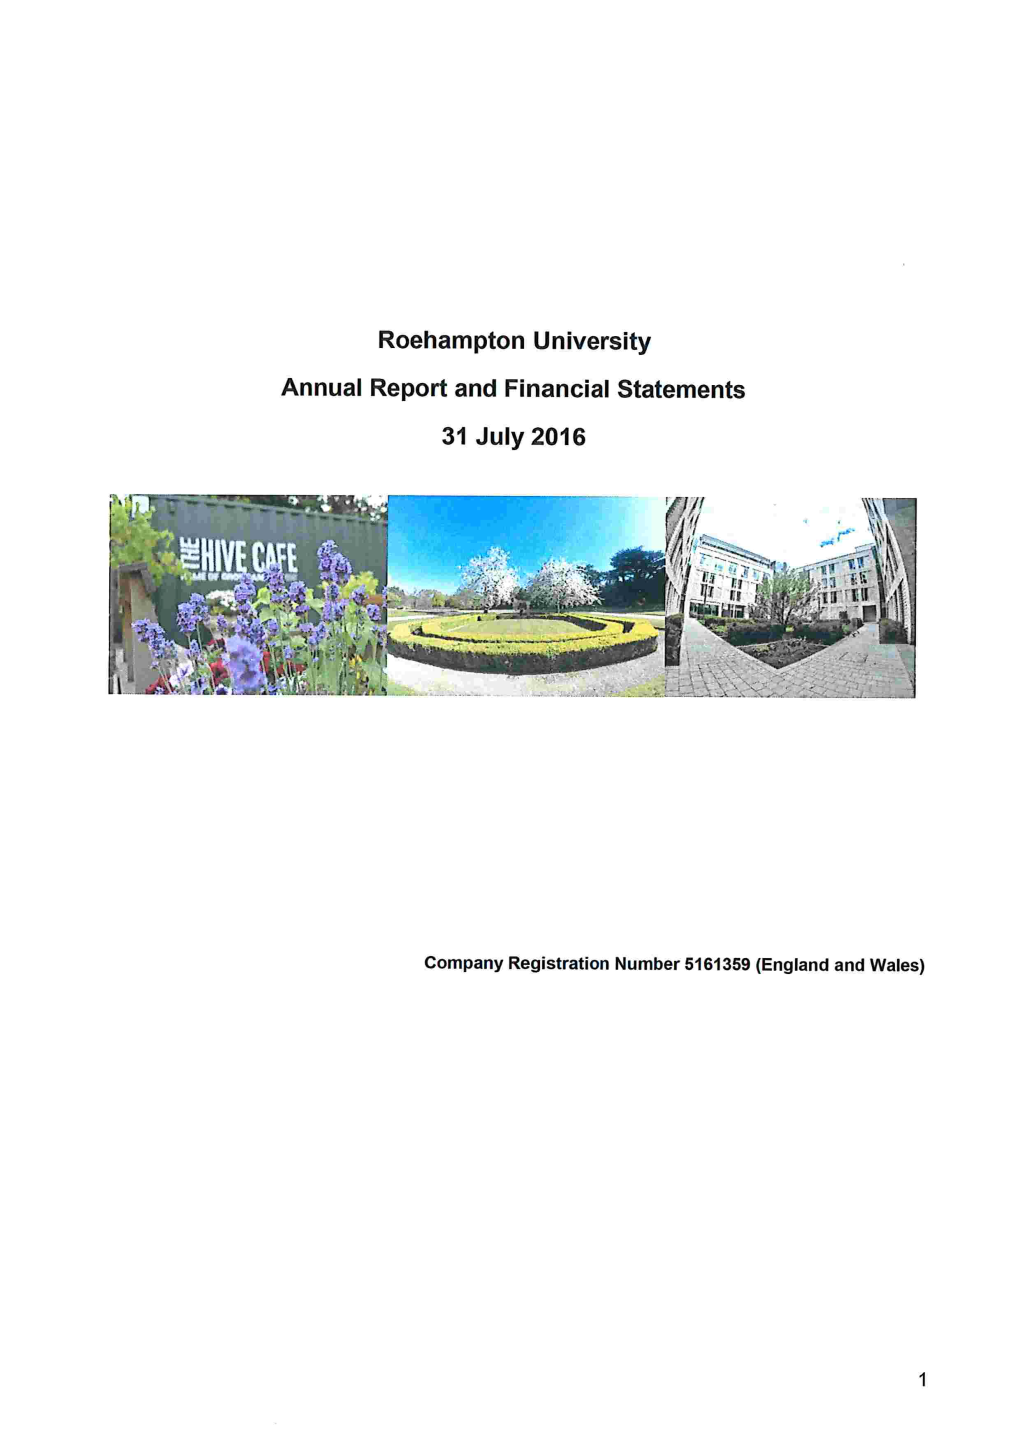 Roehampton University Annual Report and Financial Statements 31 July 2016